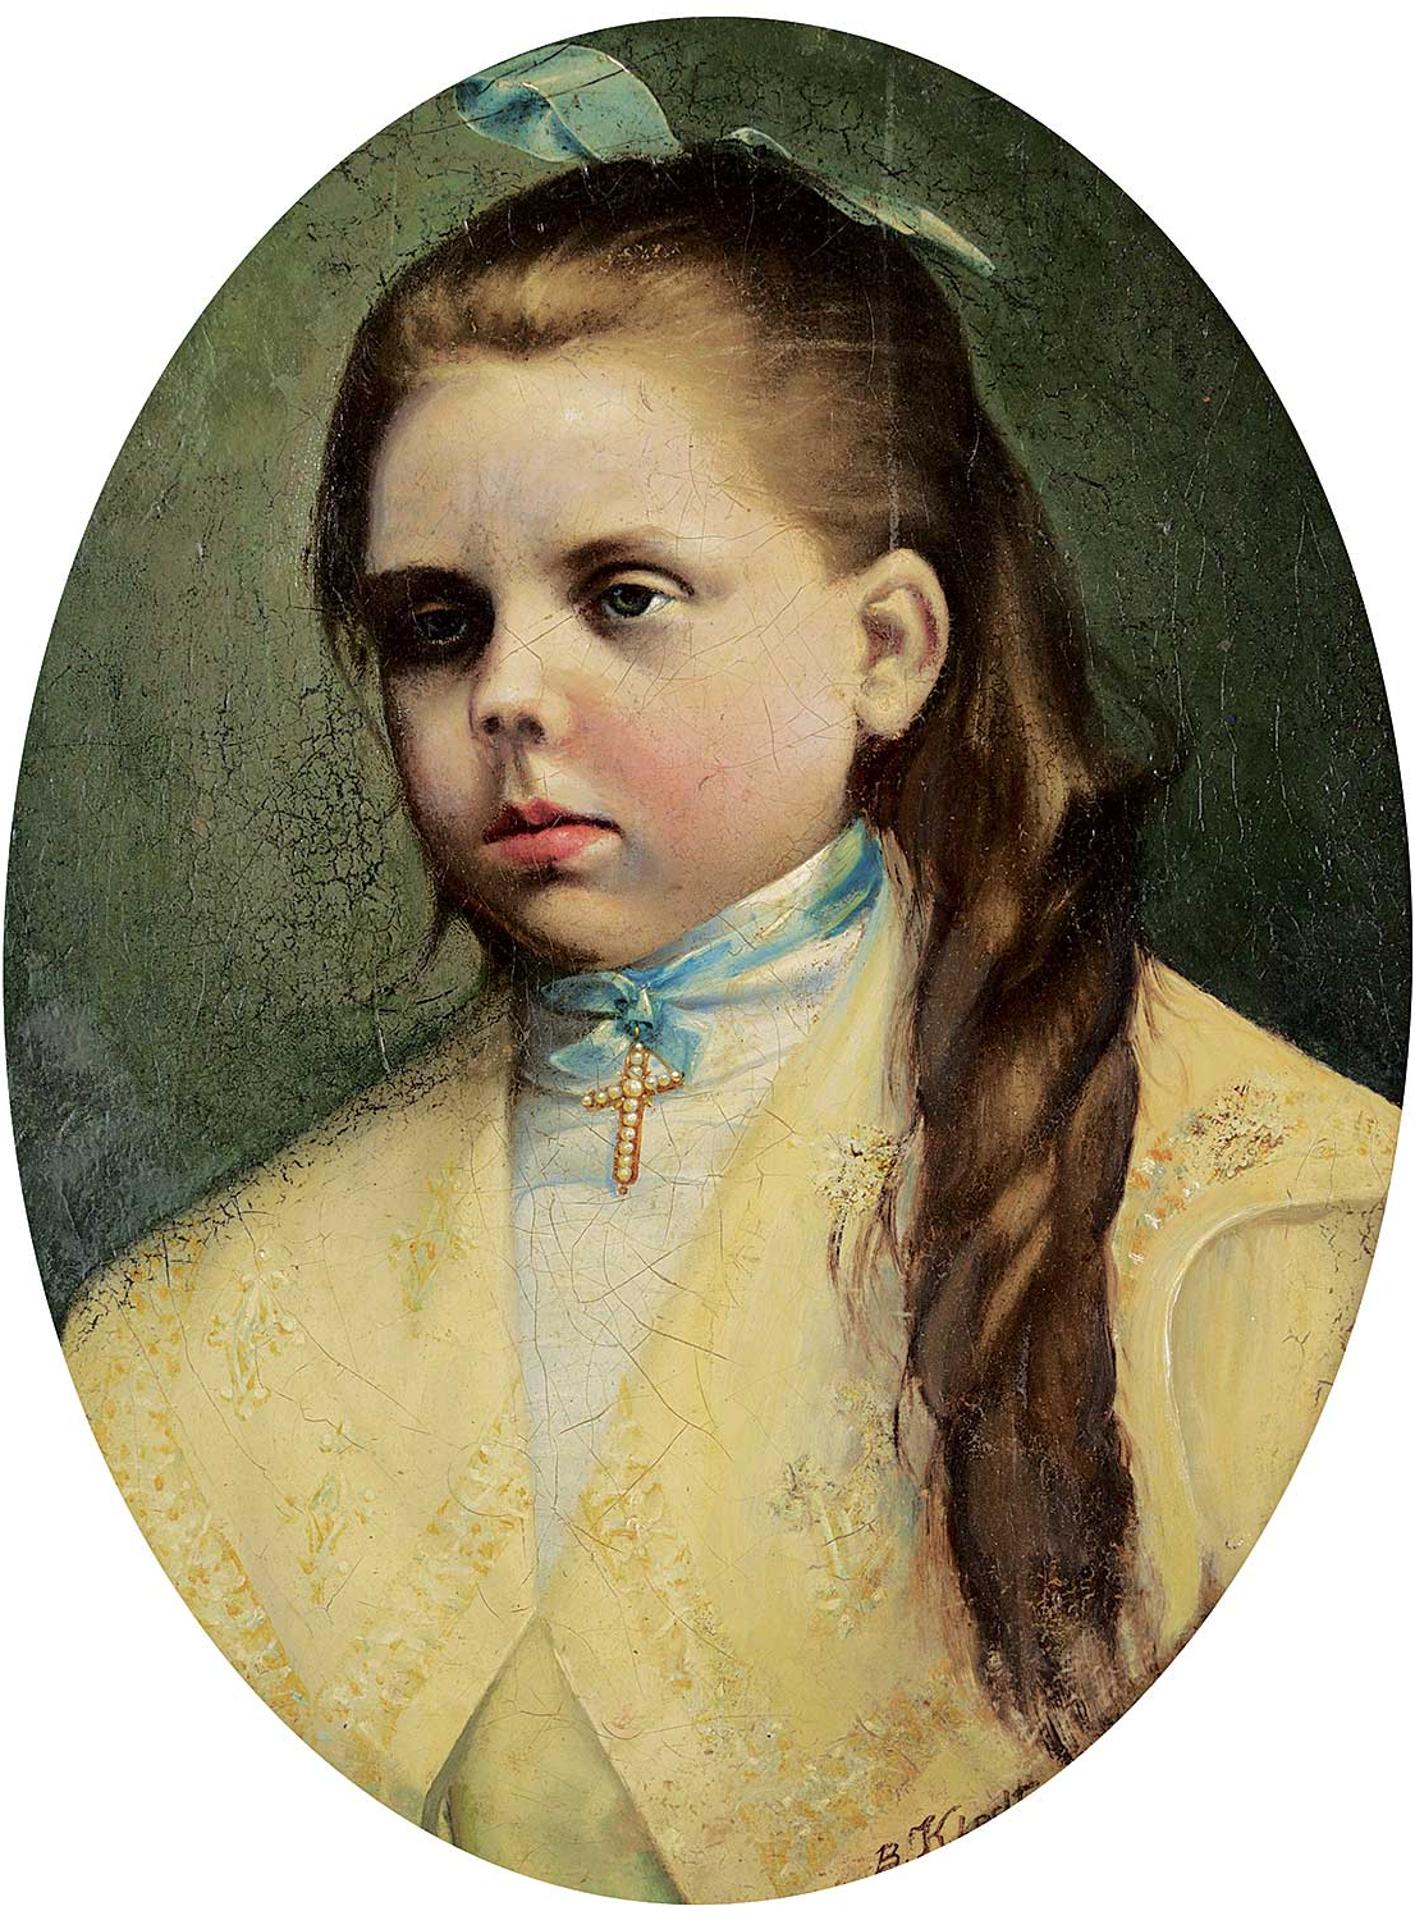 B. Klodt - Untitled - Portrait of a Girl